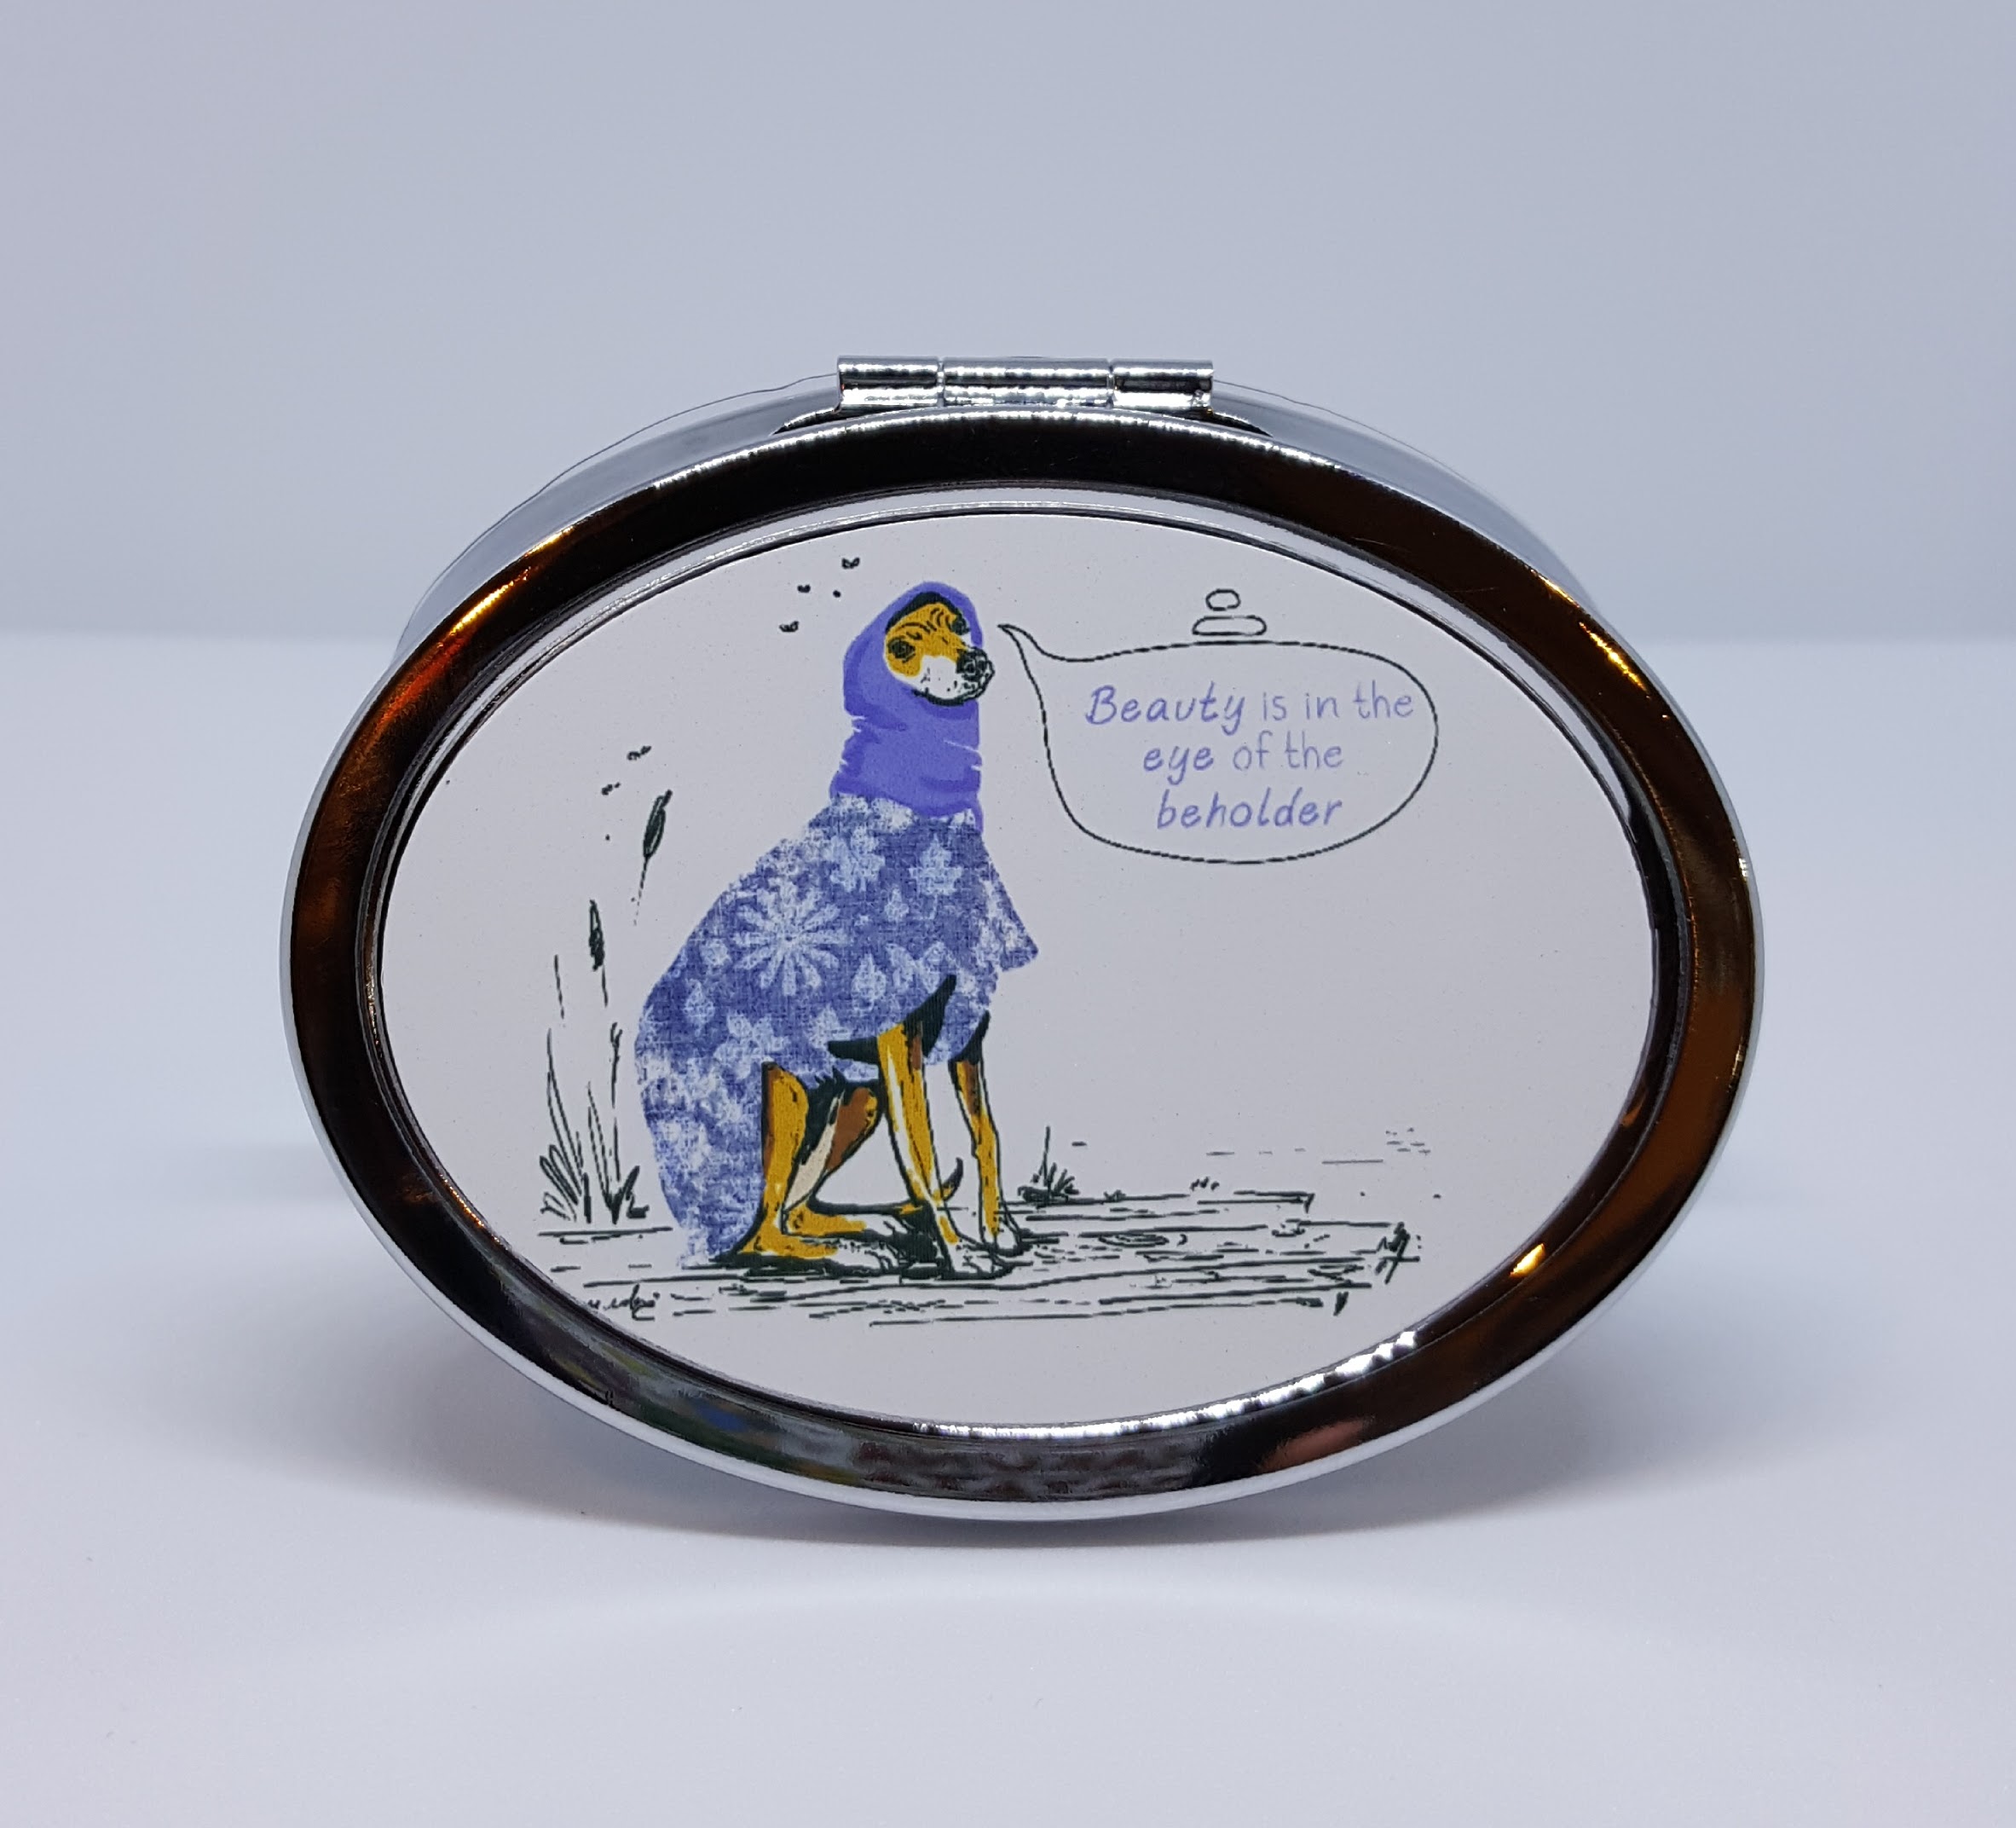 Mirror Compact made with sublimation printing